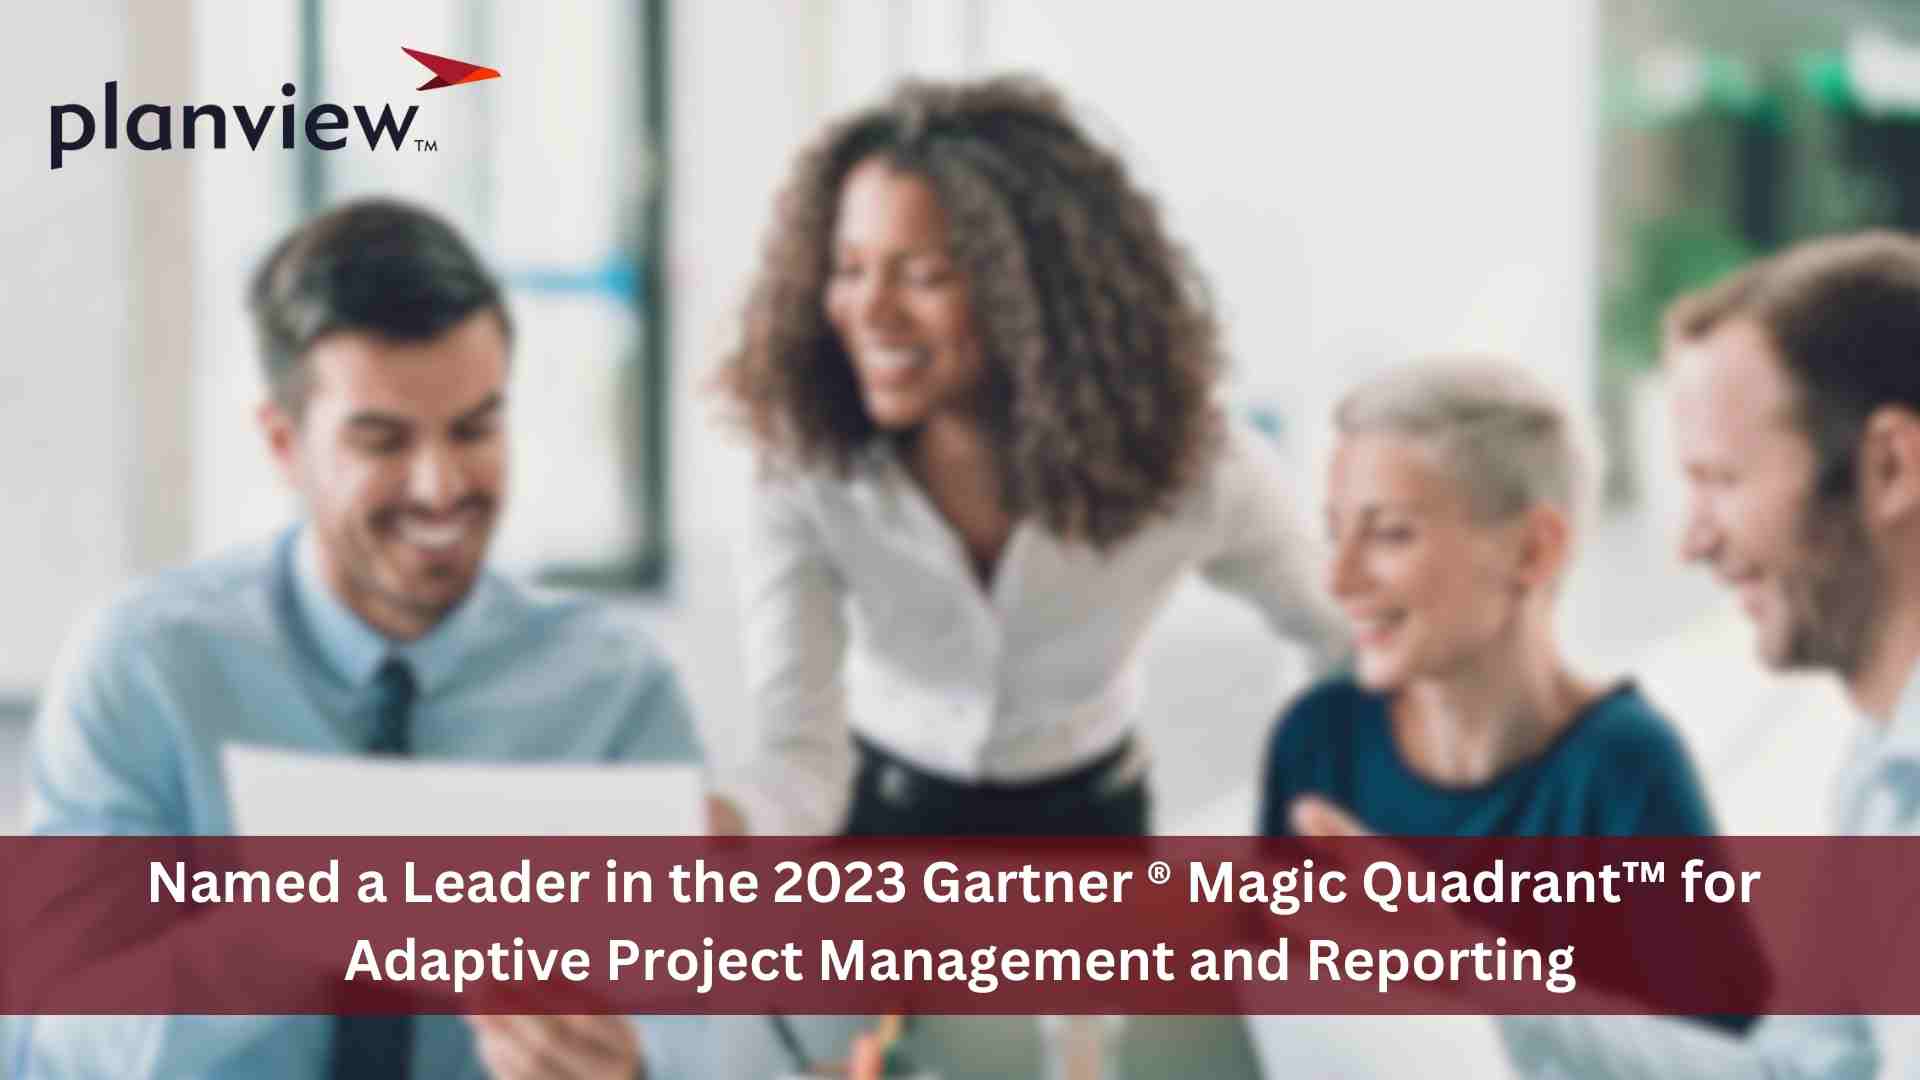 Planview Named a Leader in the 2023 Gartner ®  Magic Quadrant™ for Adaptive Project Management and Reporting.